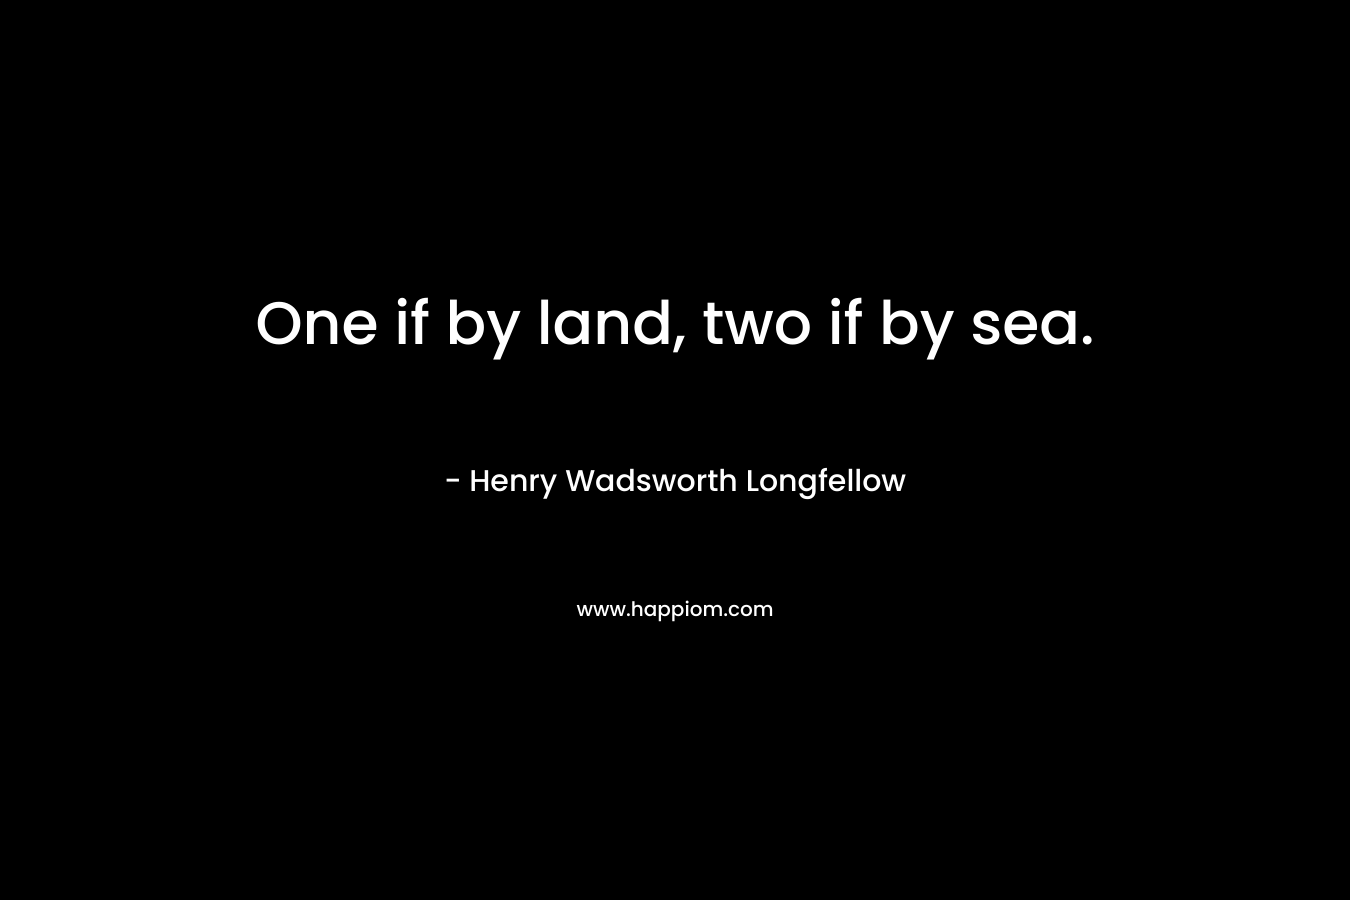 One if by land, two if by sea.